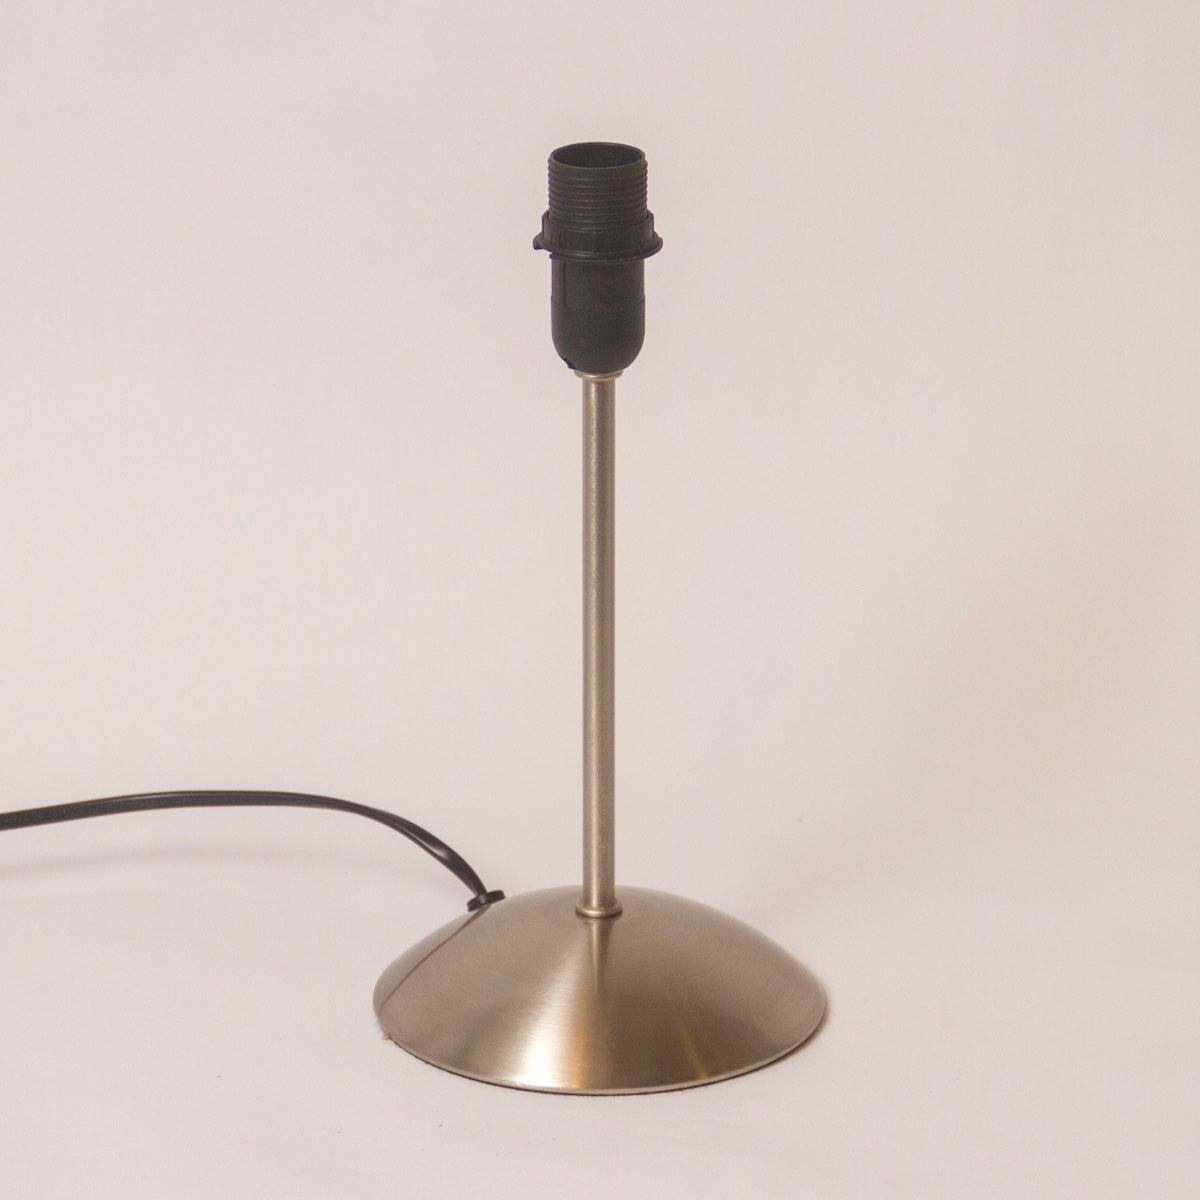 Tall Stem Table Lamp Base with Oval Lamp Shade P68 (20cm wide x 20cm high x 13cm deep)